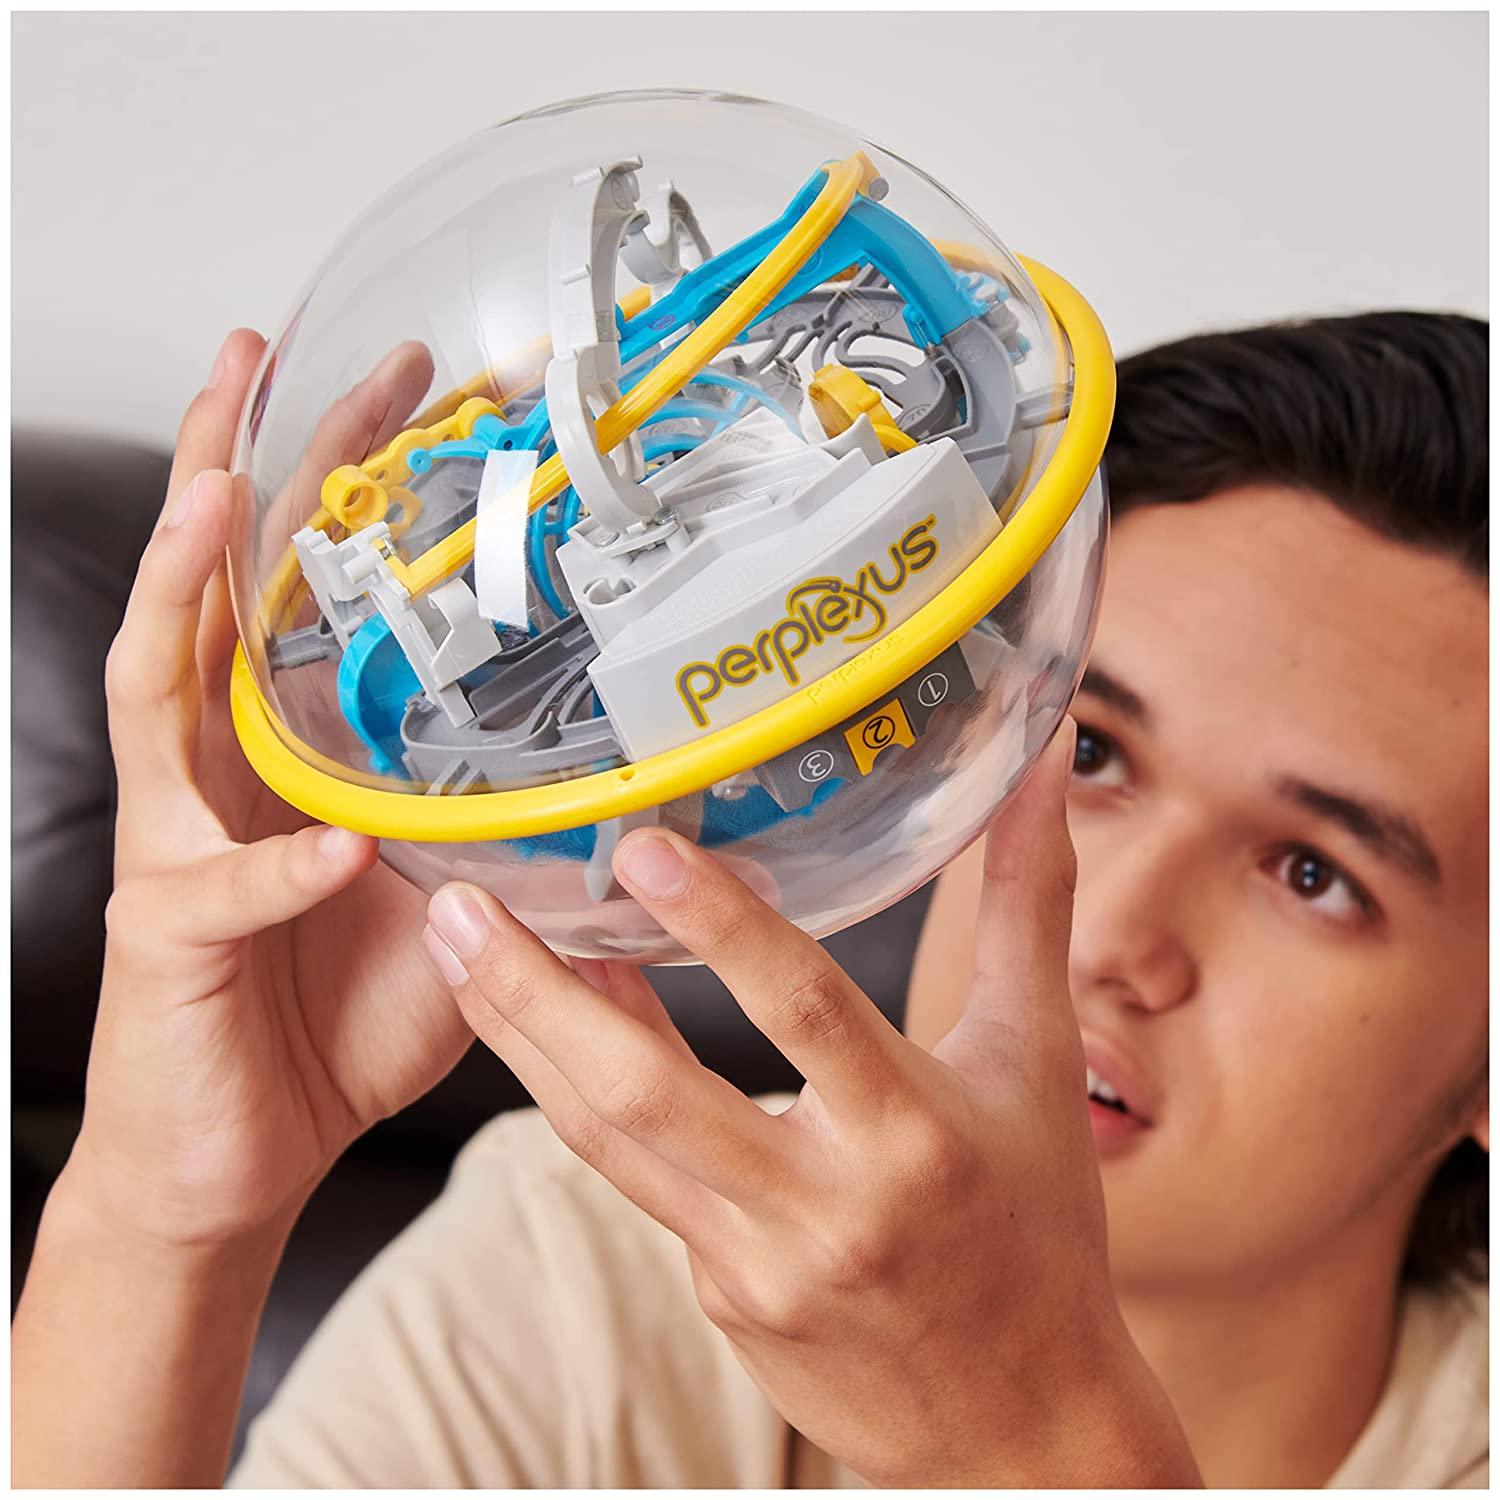 Funskool Perplexus Beast, 3D Maze Game With 100 Obstacles For Ages 8+ - FunCorp India